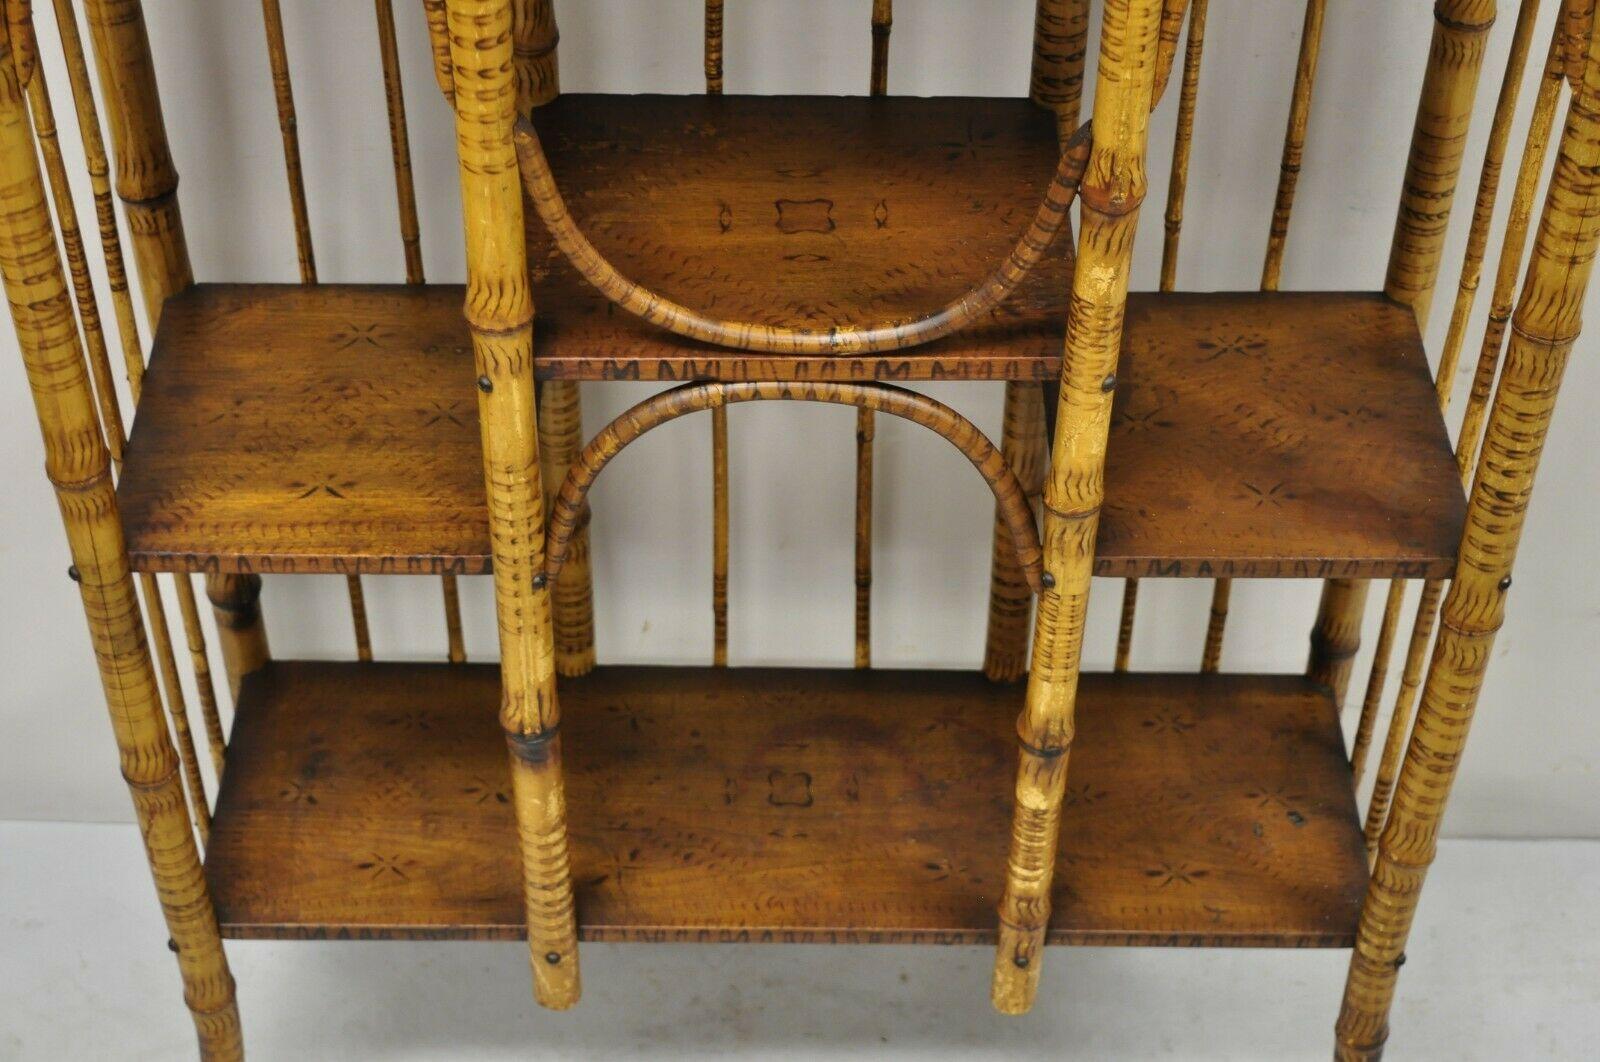 19th C. English Victorian Bamboo Stick and Ball Curio Shelf Display Etagere For Sale 3